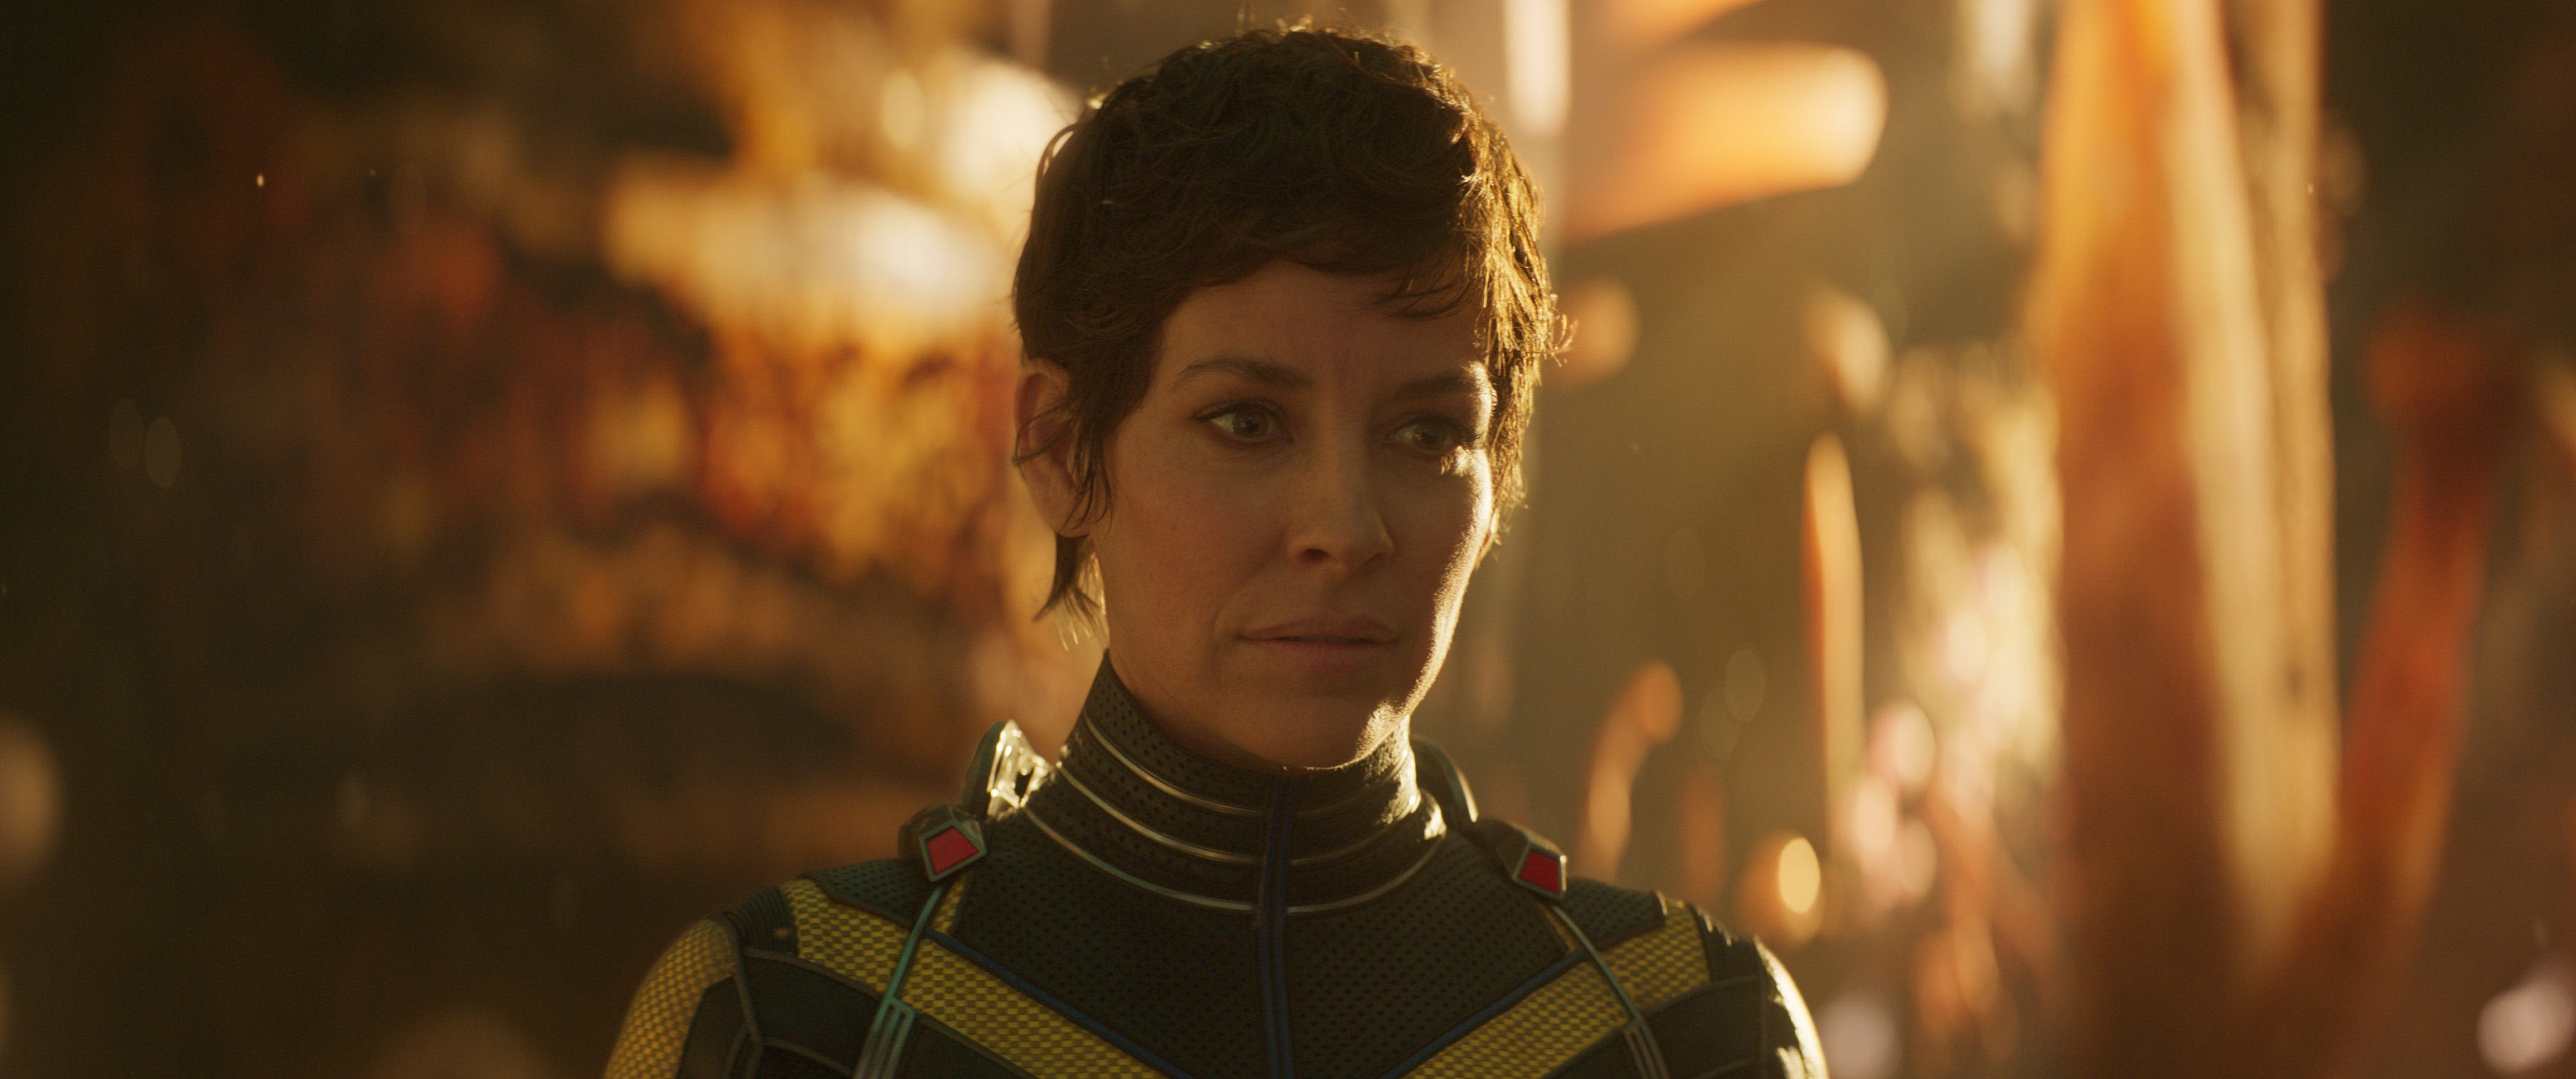 Evangeline Lilly says she's on an 'indefinite hiatus' from Hollywood: 'Living my dreams'